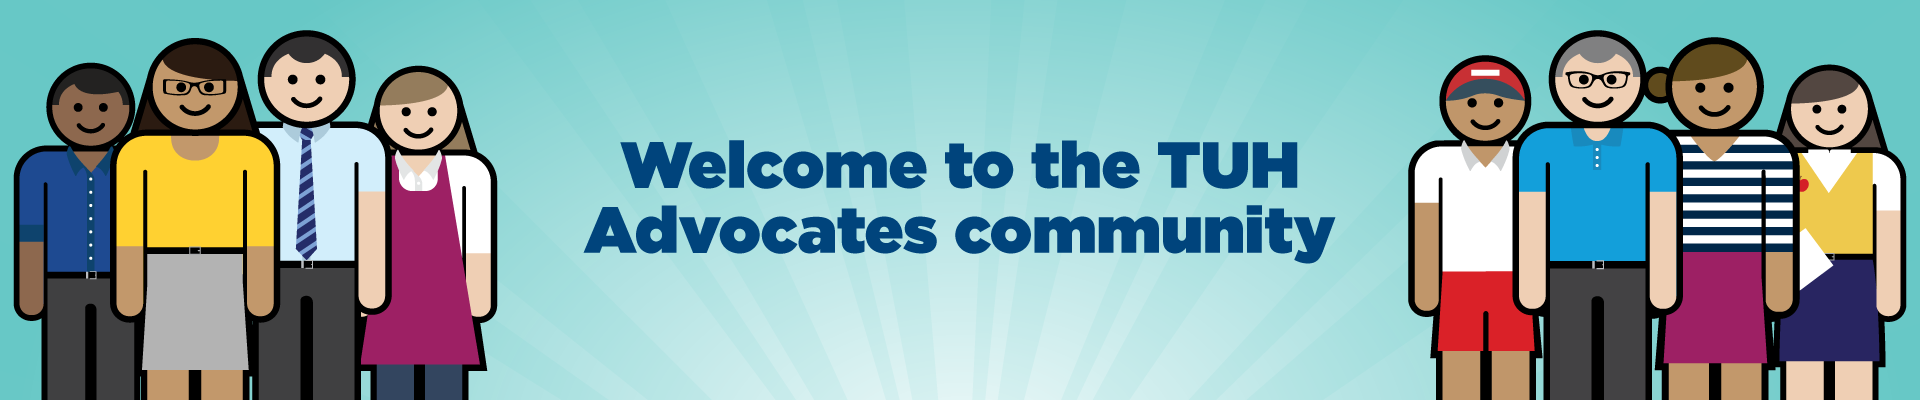 avatars on blue background saying 'welcome to the TUH advocates community'